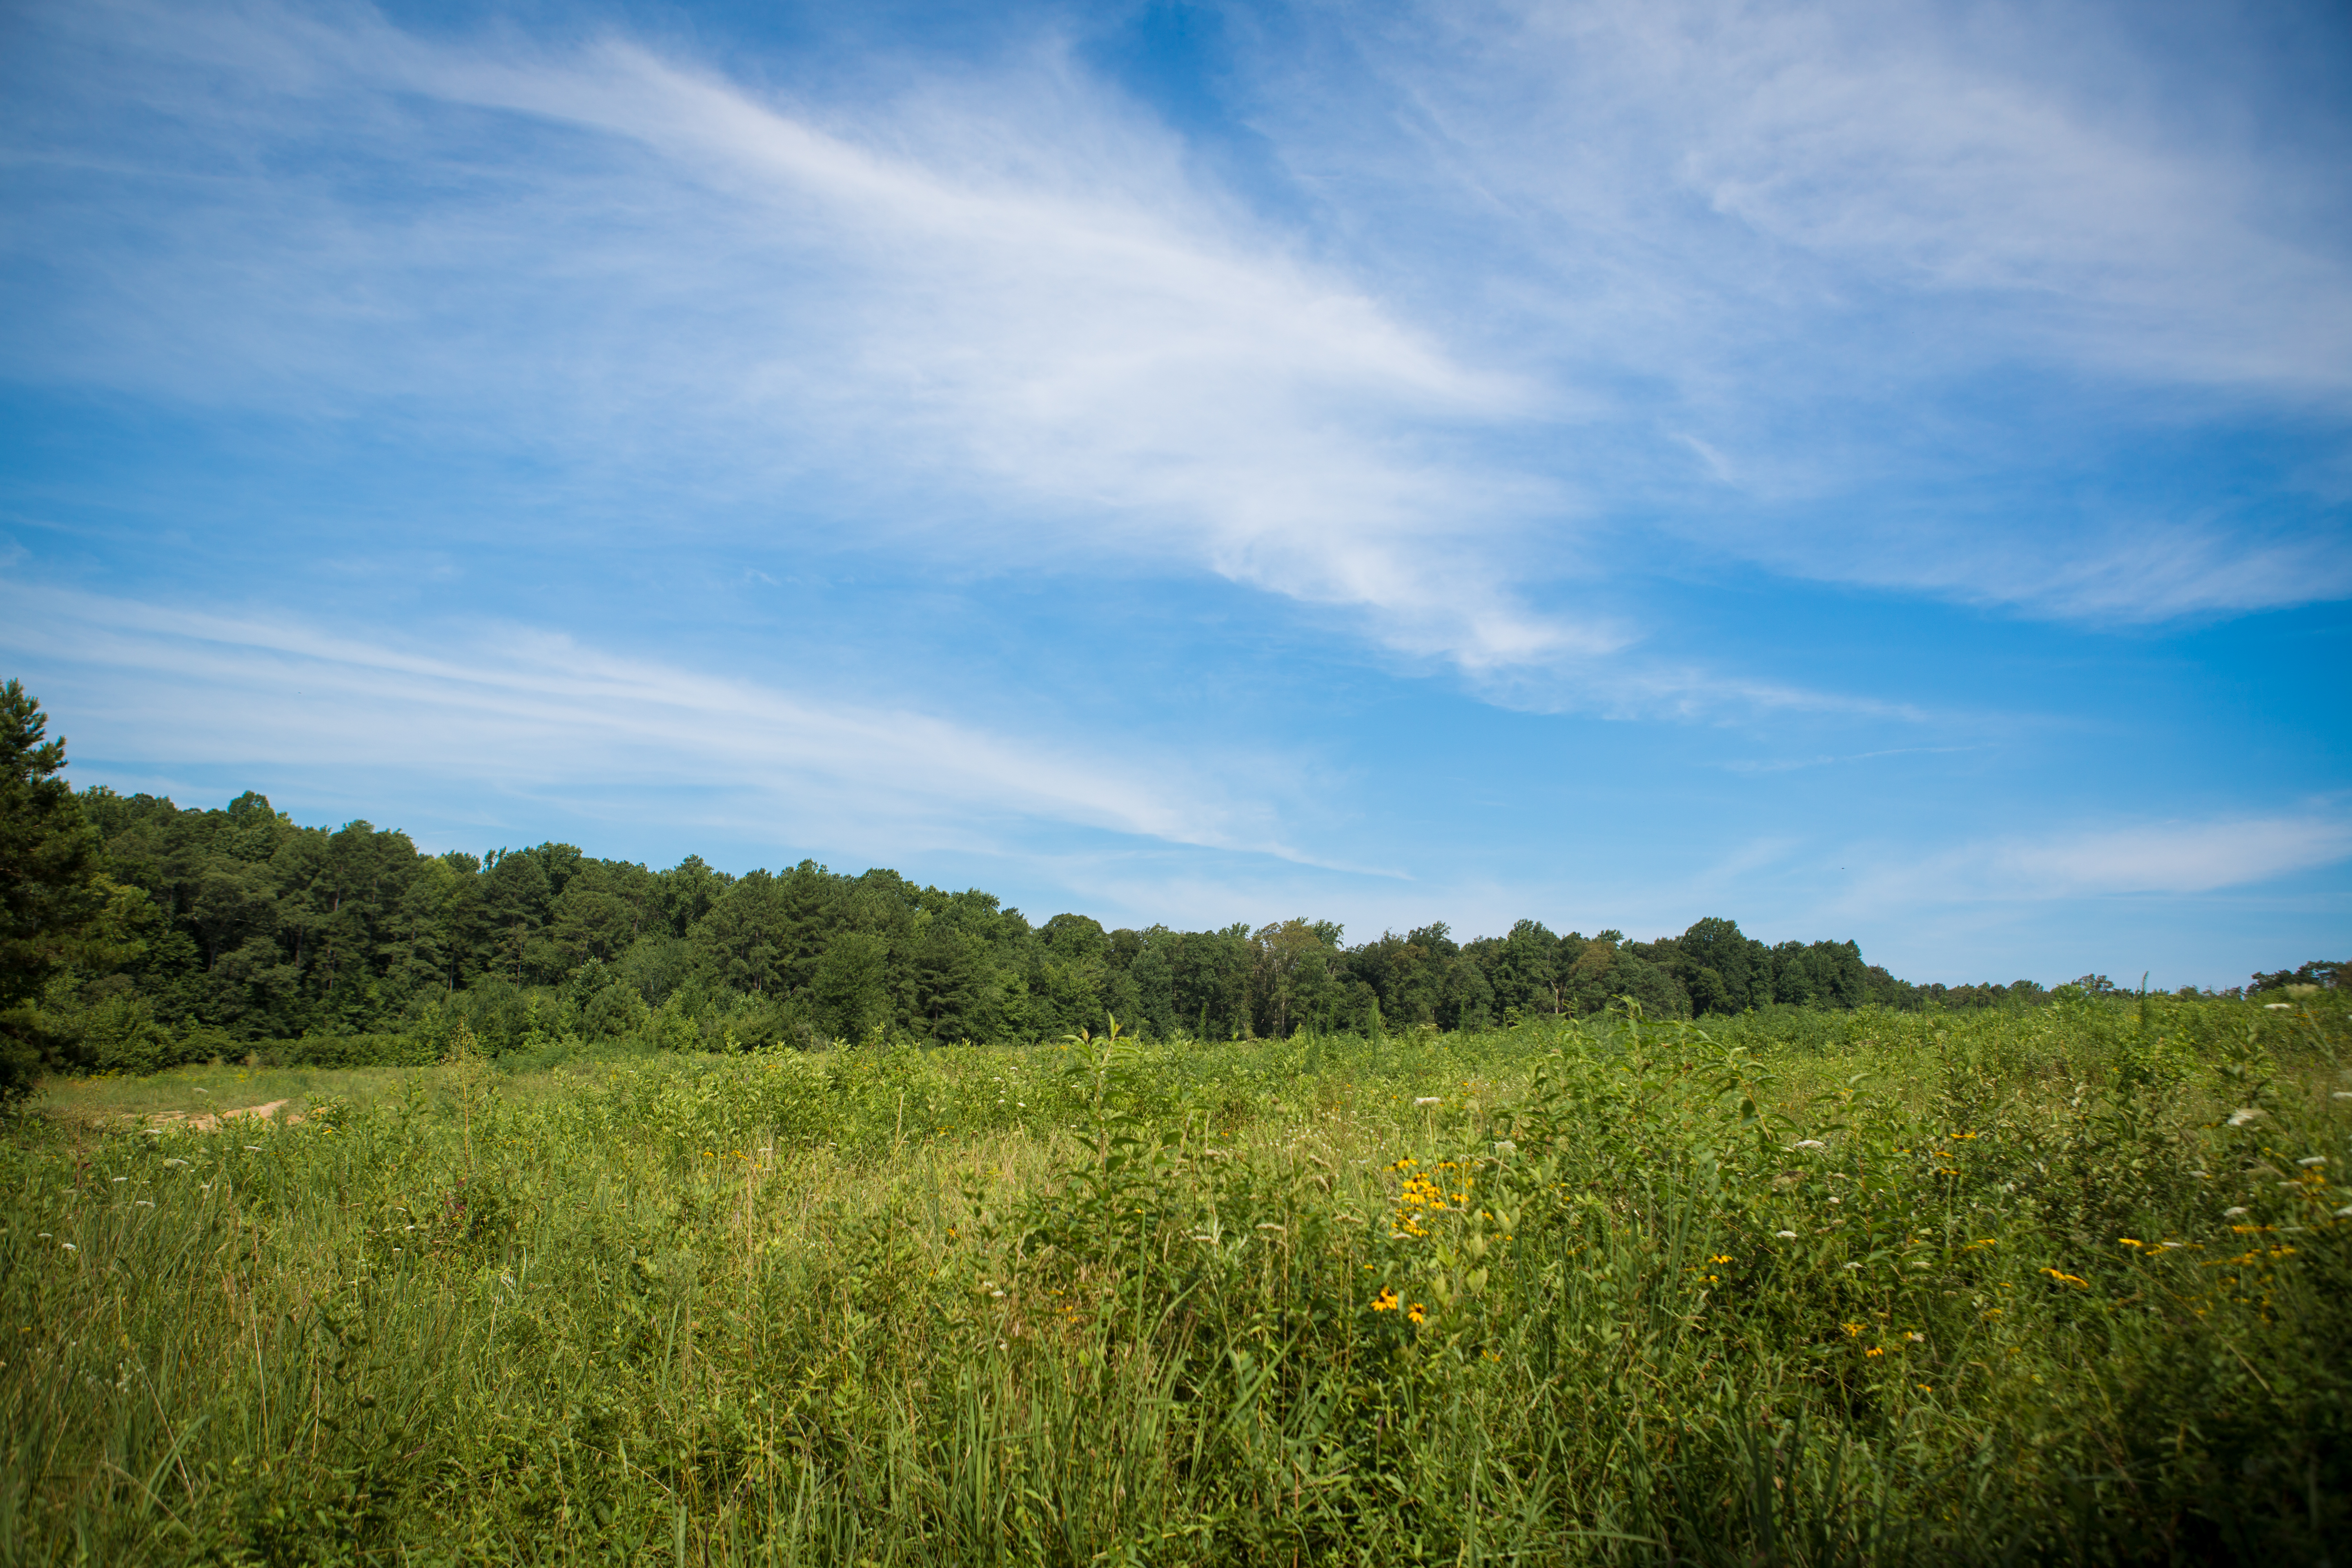 An image of a meadow with a forest in the background